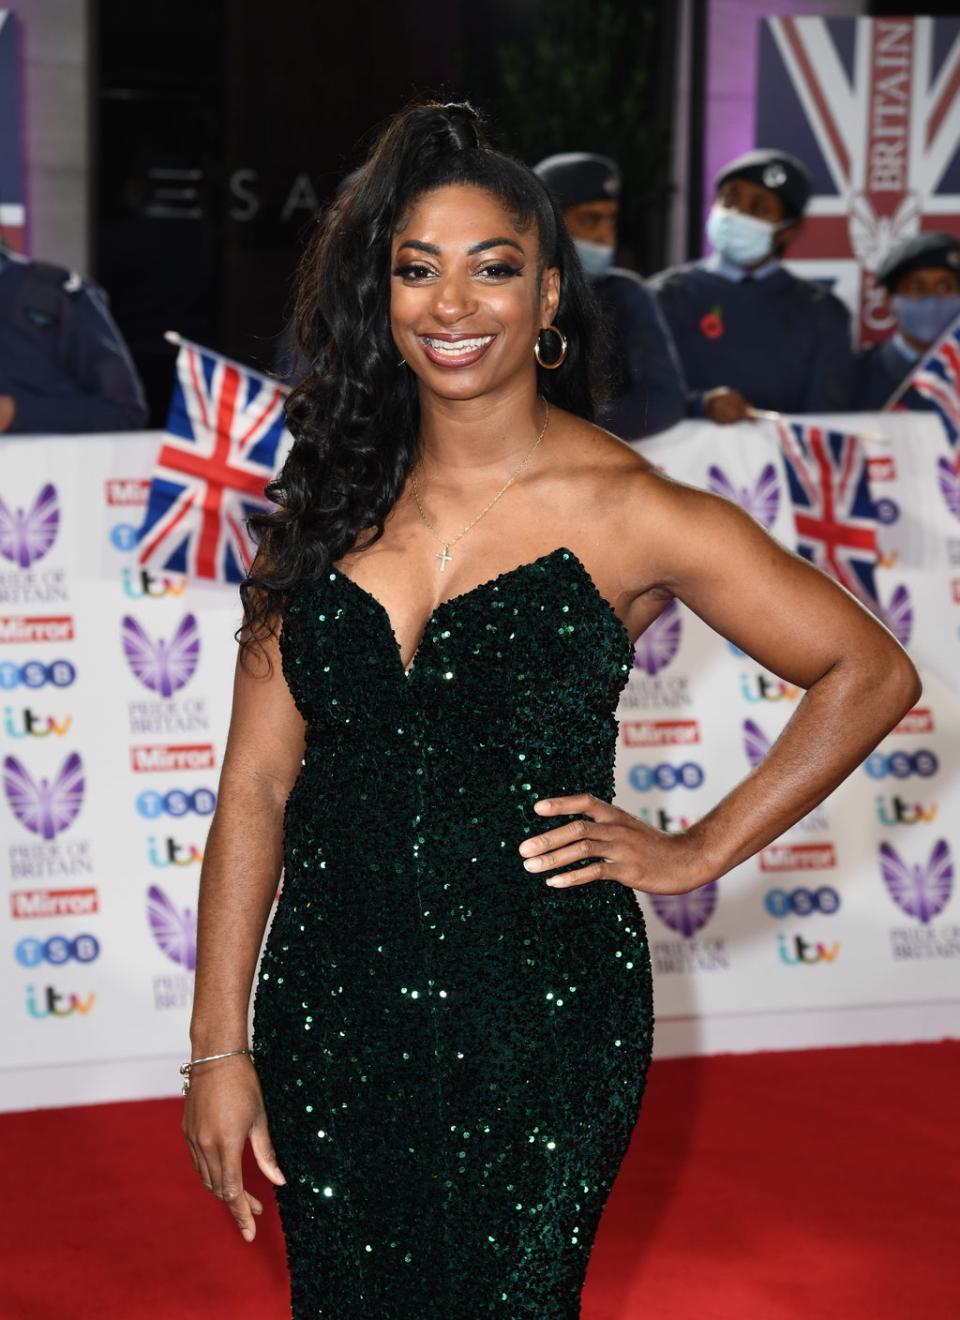 Kadeena Cox attends the Pride Of Britain Awards 2021 at The Grosvenor House Hotel on October 30, 2021 in London (Gareth Cattermole/Getty Images)